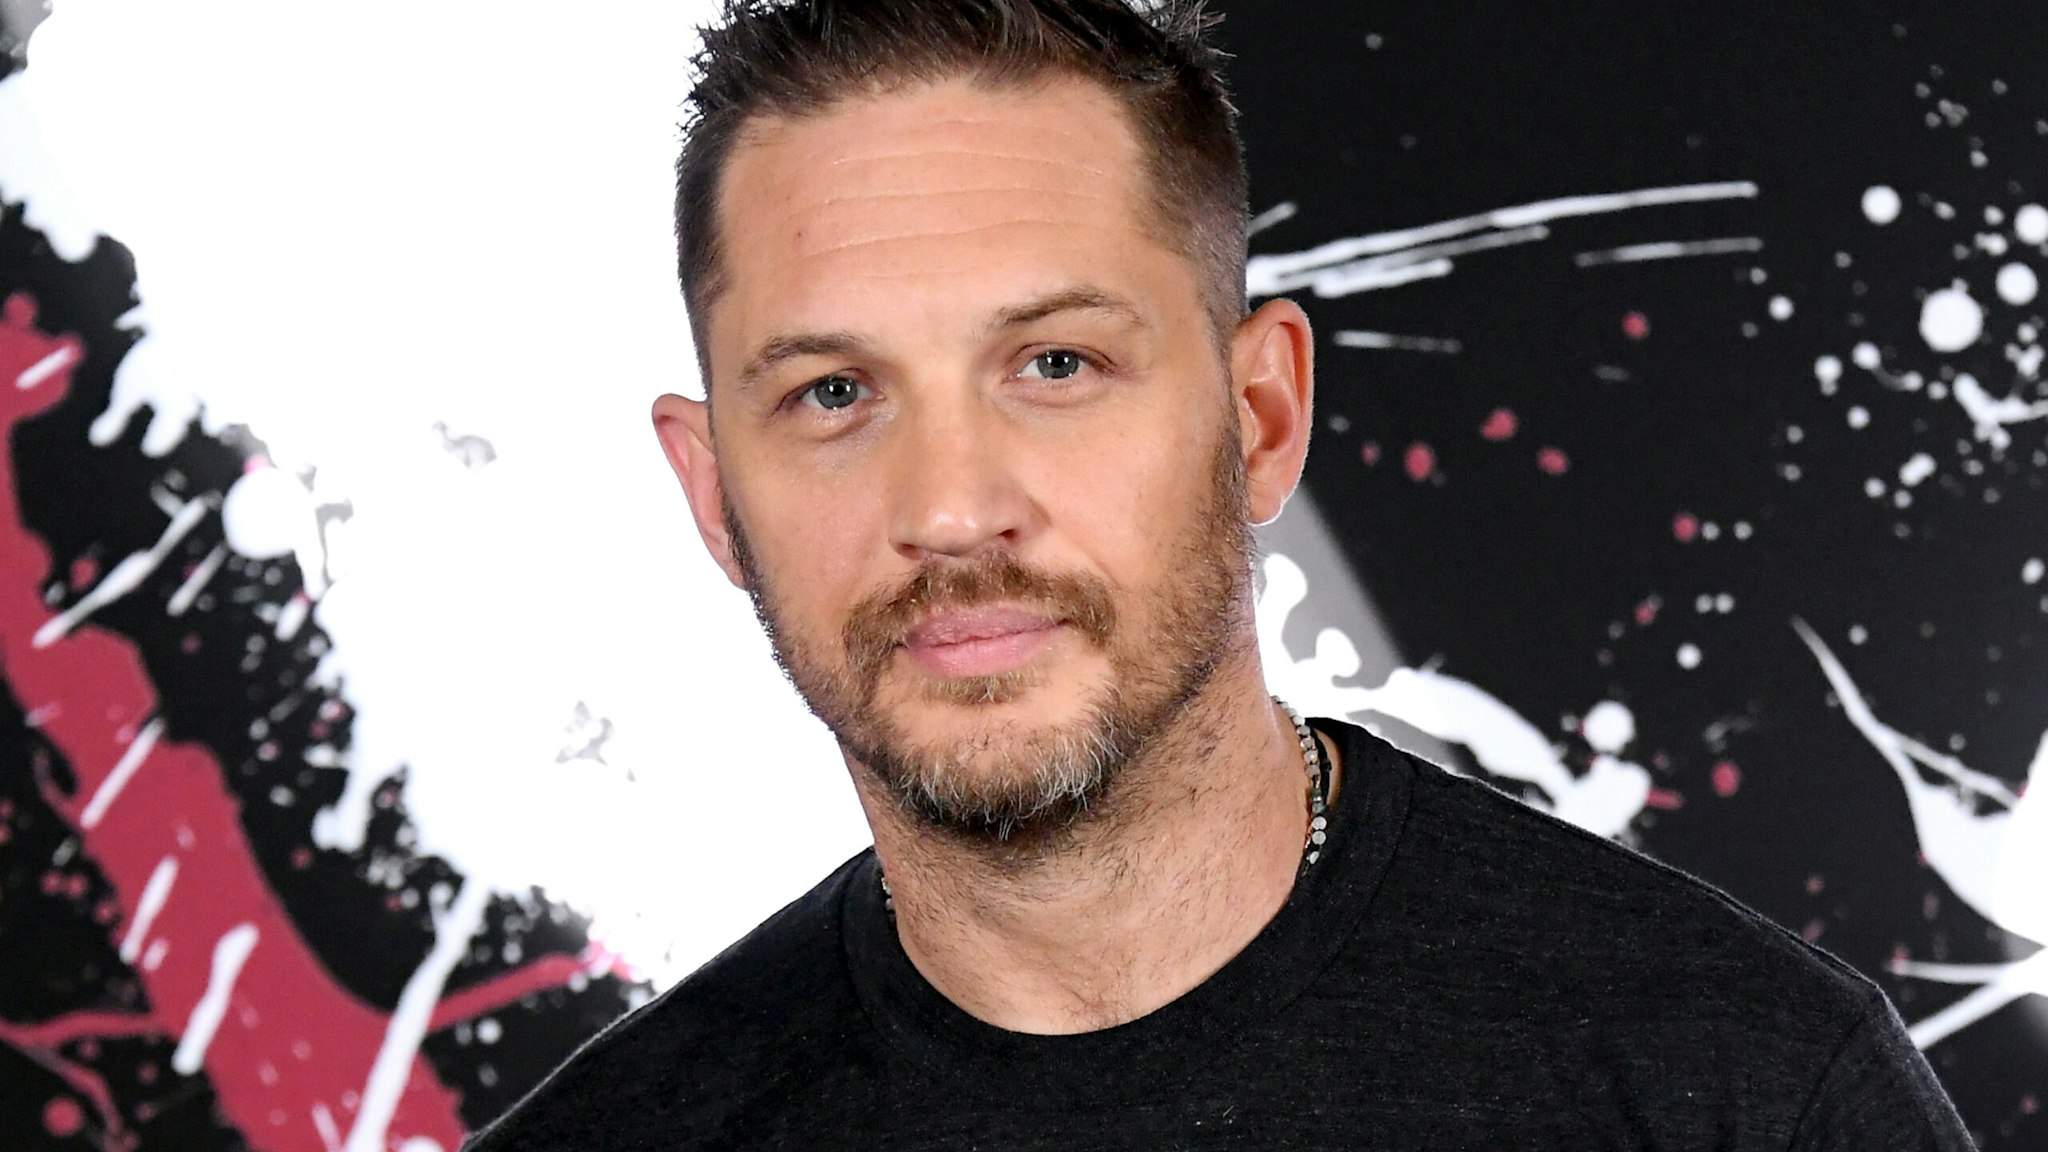 LOS ANGELES, CALIFORNIA - SEPTEMBER 27: Tom Hardy attends the photo call for Columbia Pictures' "Venom" at the Four Seasons Hotel Los Angeles at Beverly Hills on September 27, 2018 in Los Angeles, California. (Photo by Steve Granitz/WireImage)